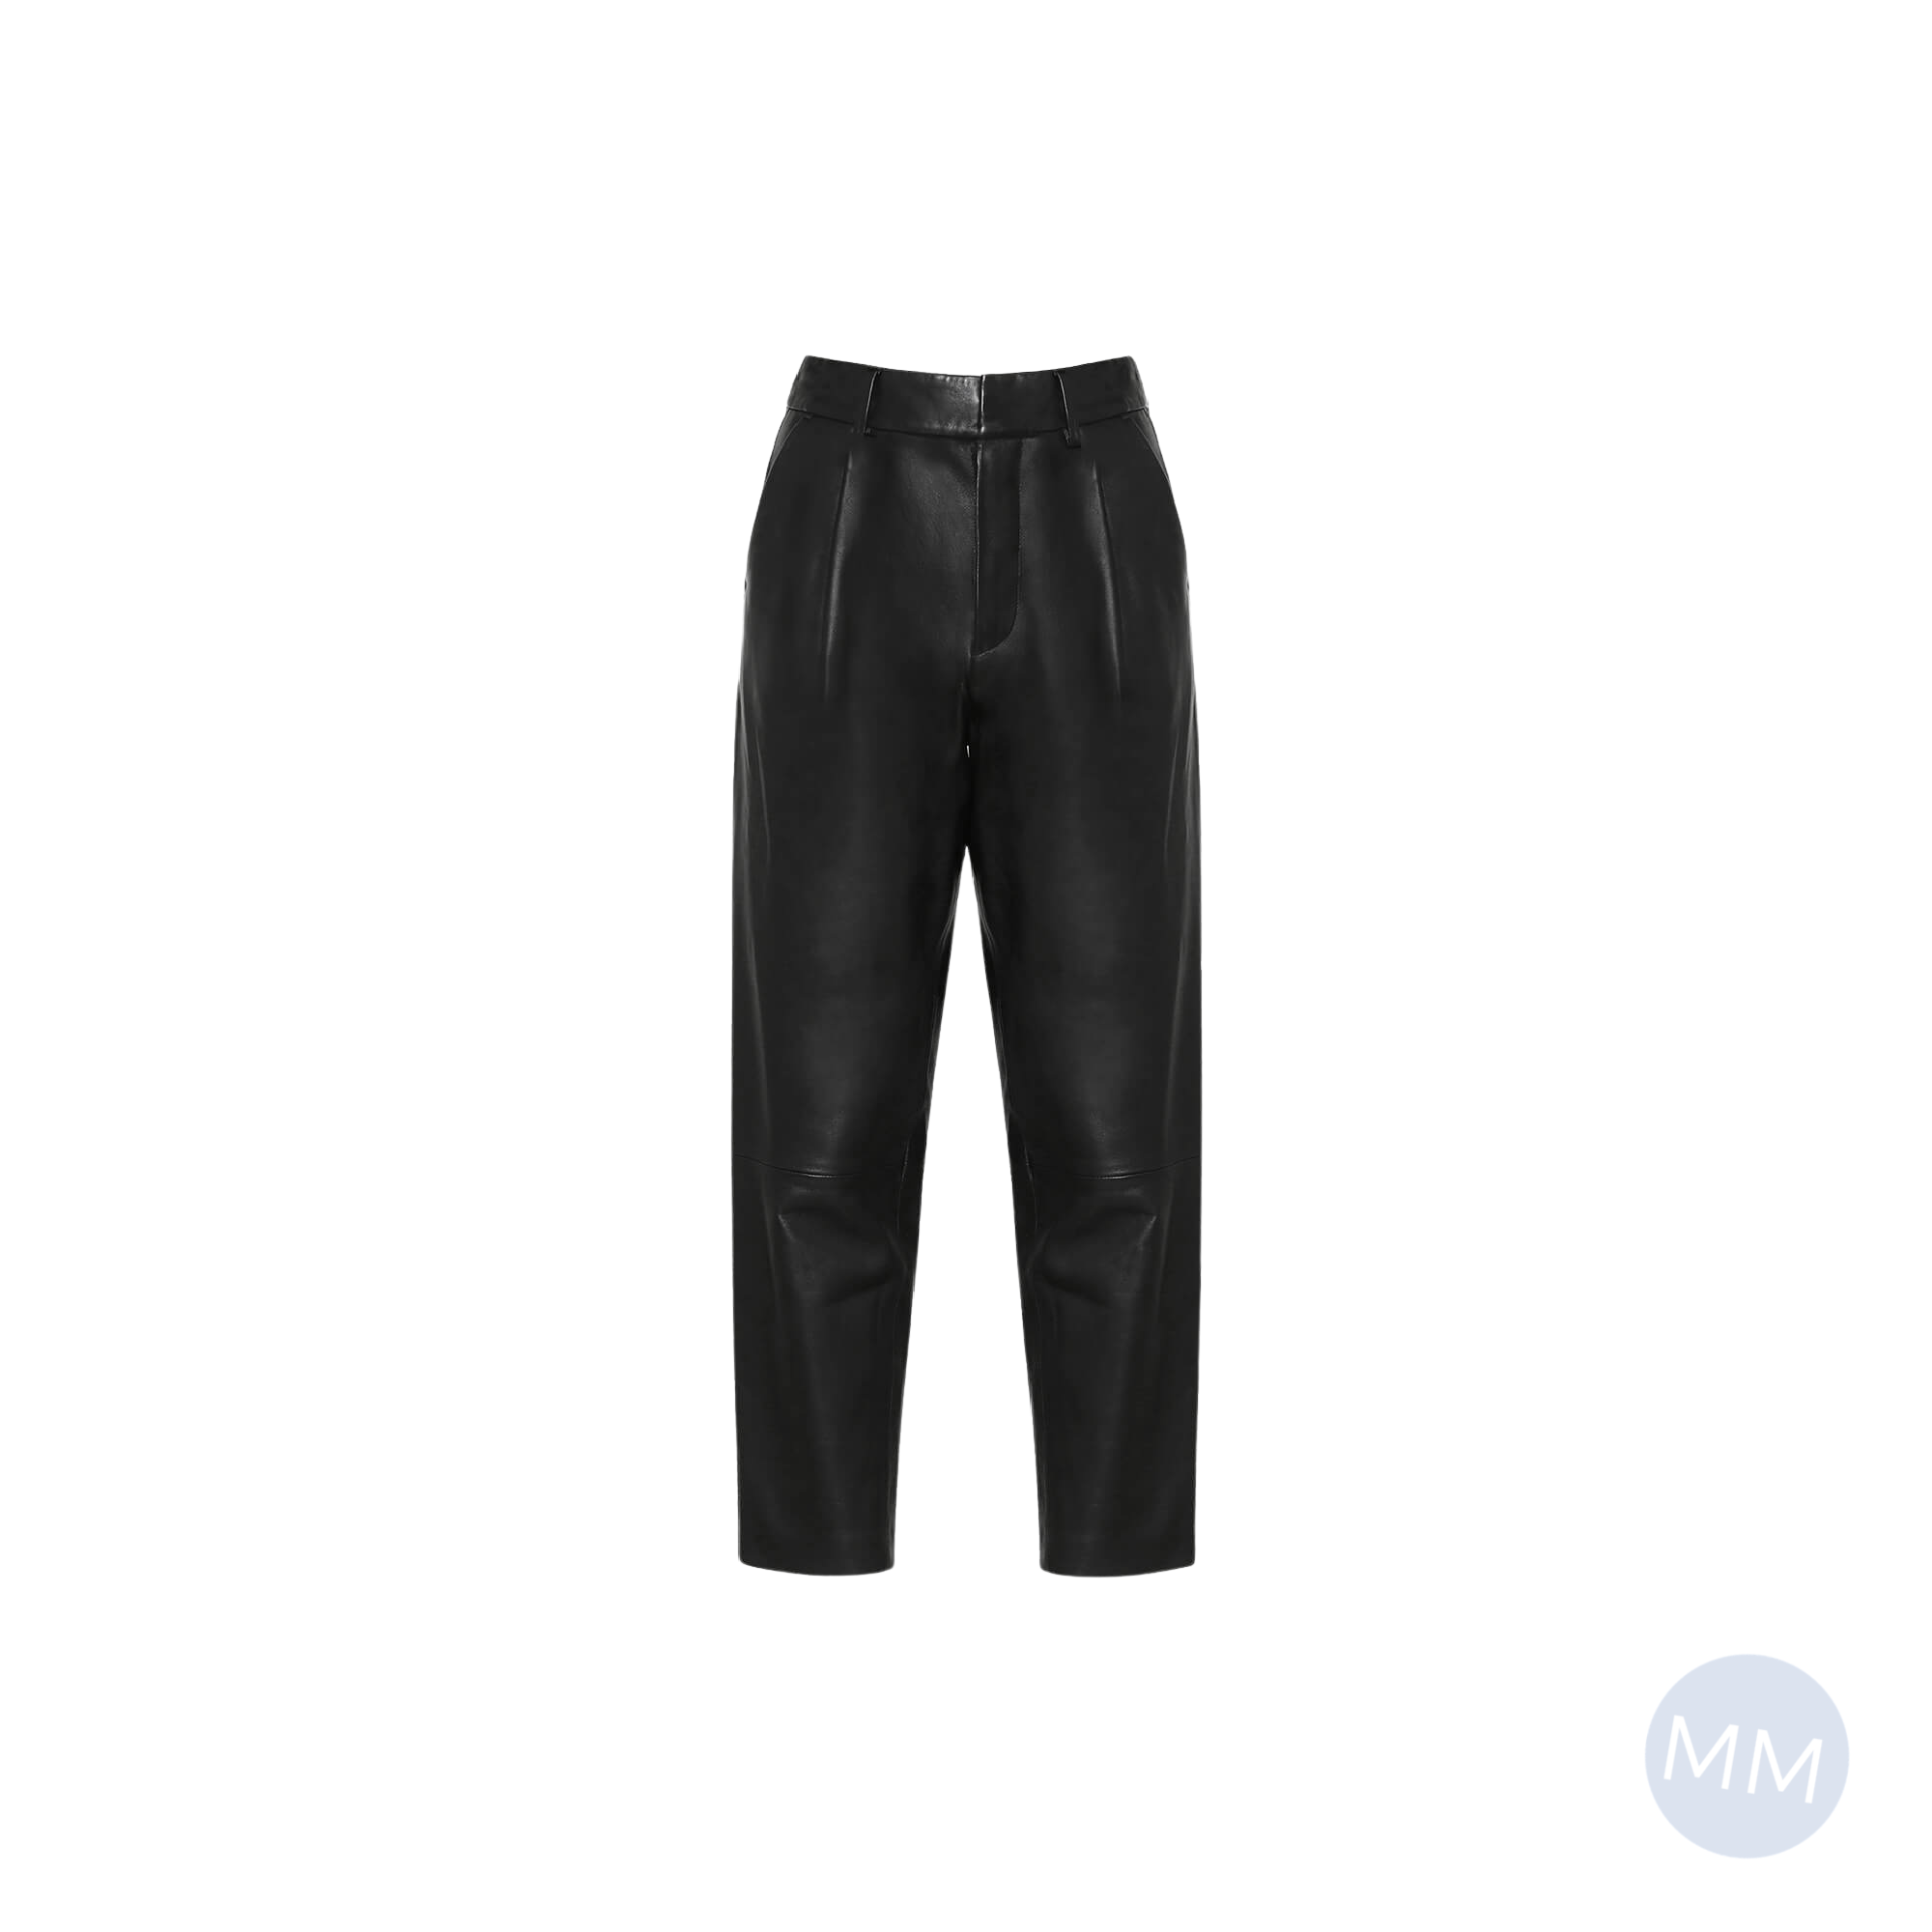 Anine Bing 'Becky' Leather Pants - Meghan's Mirror